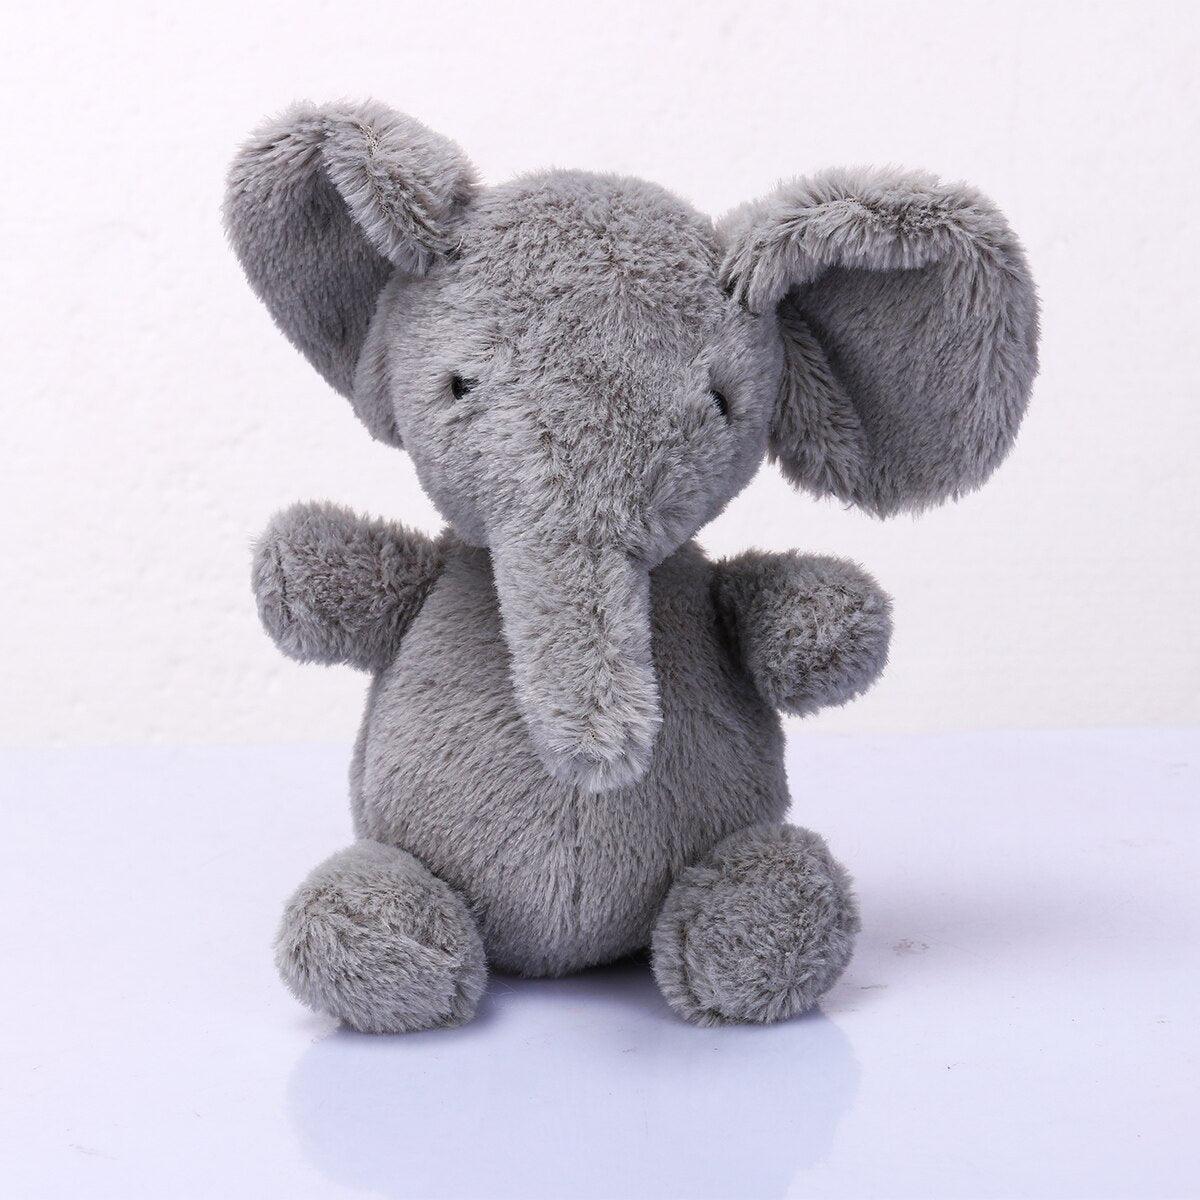 Super Cute and Fuzzy Elephant Plushies, Great for Sleepy Babies - Plushies